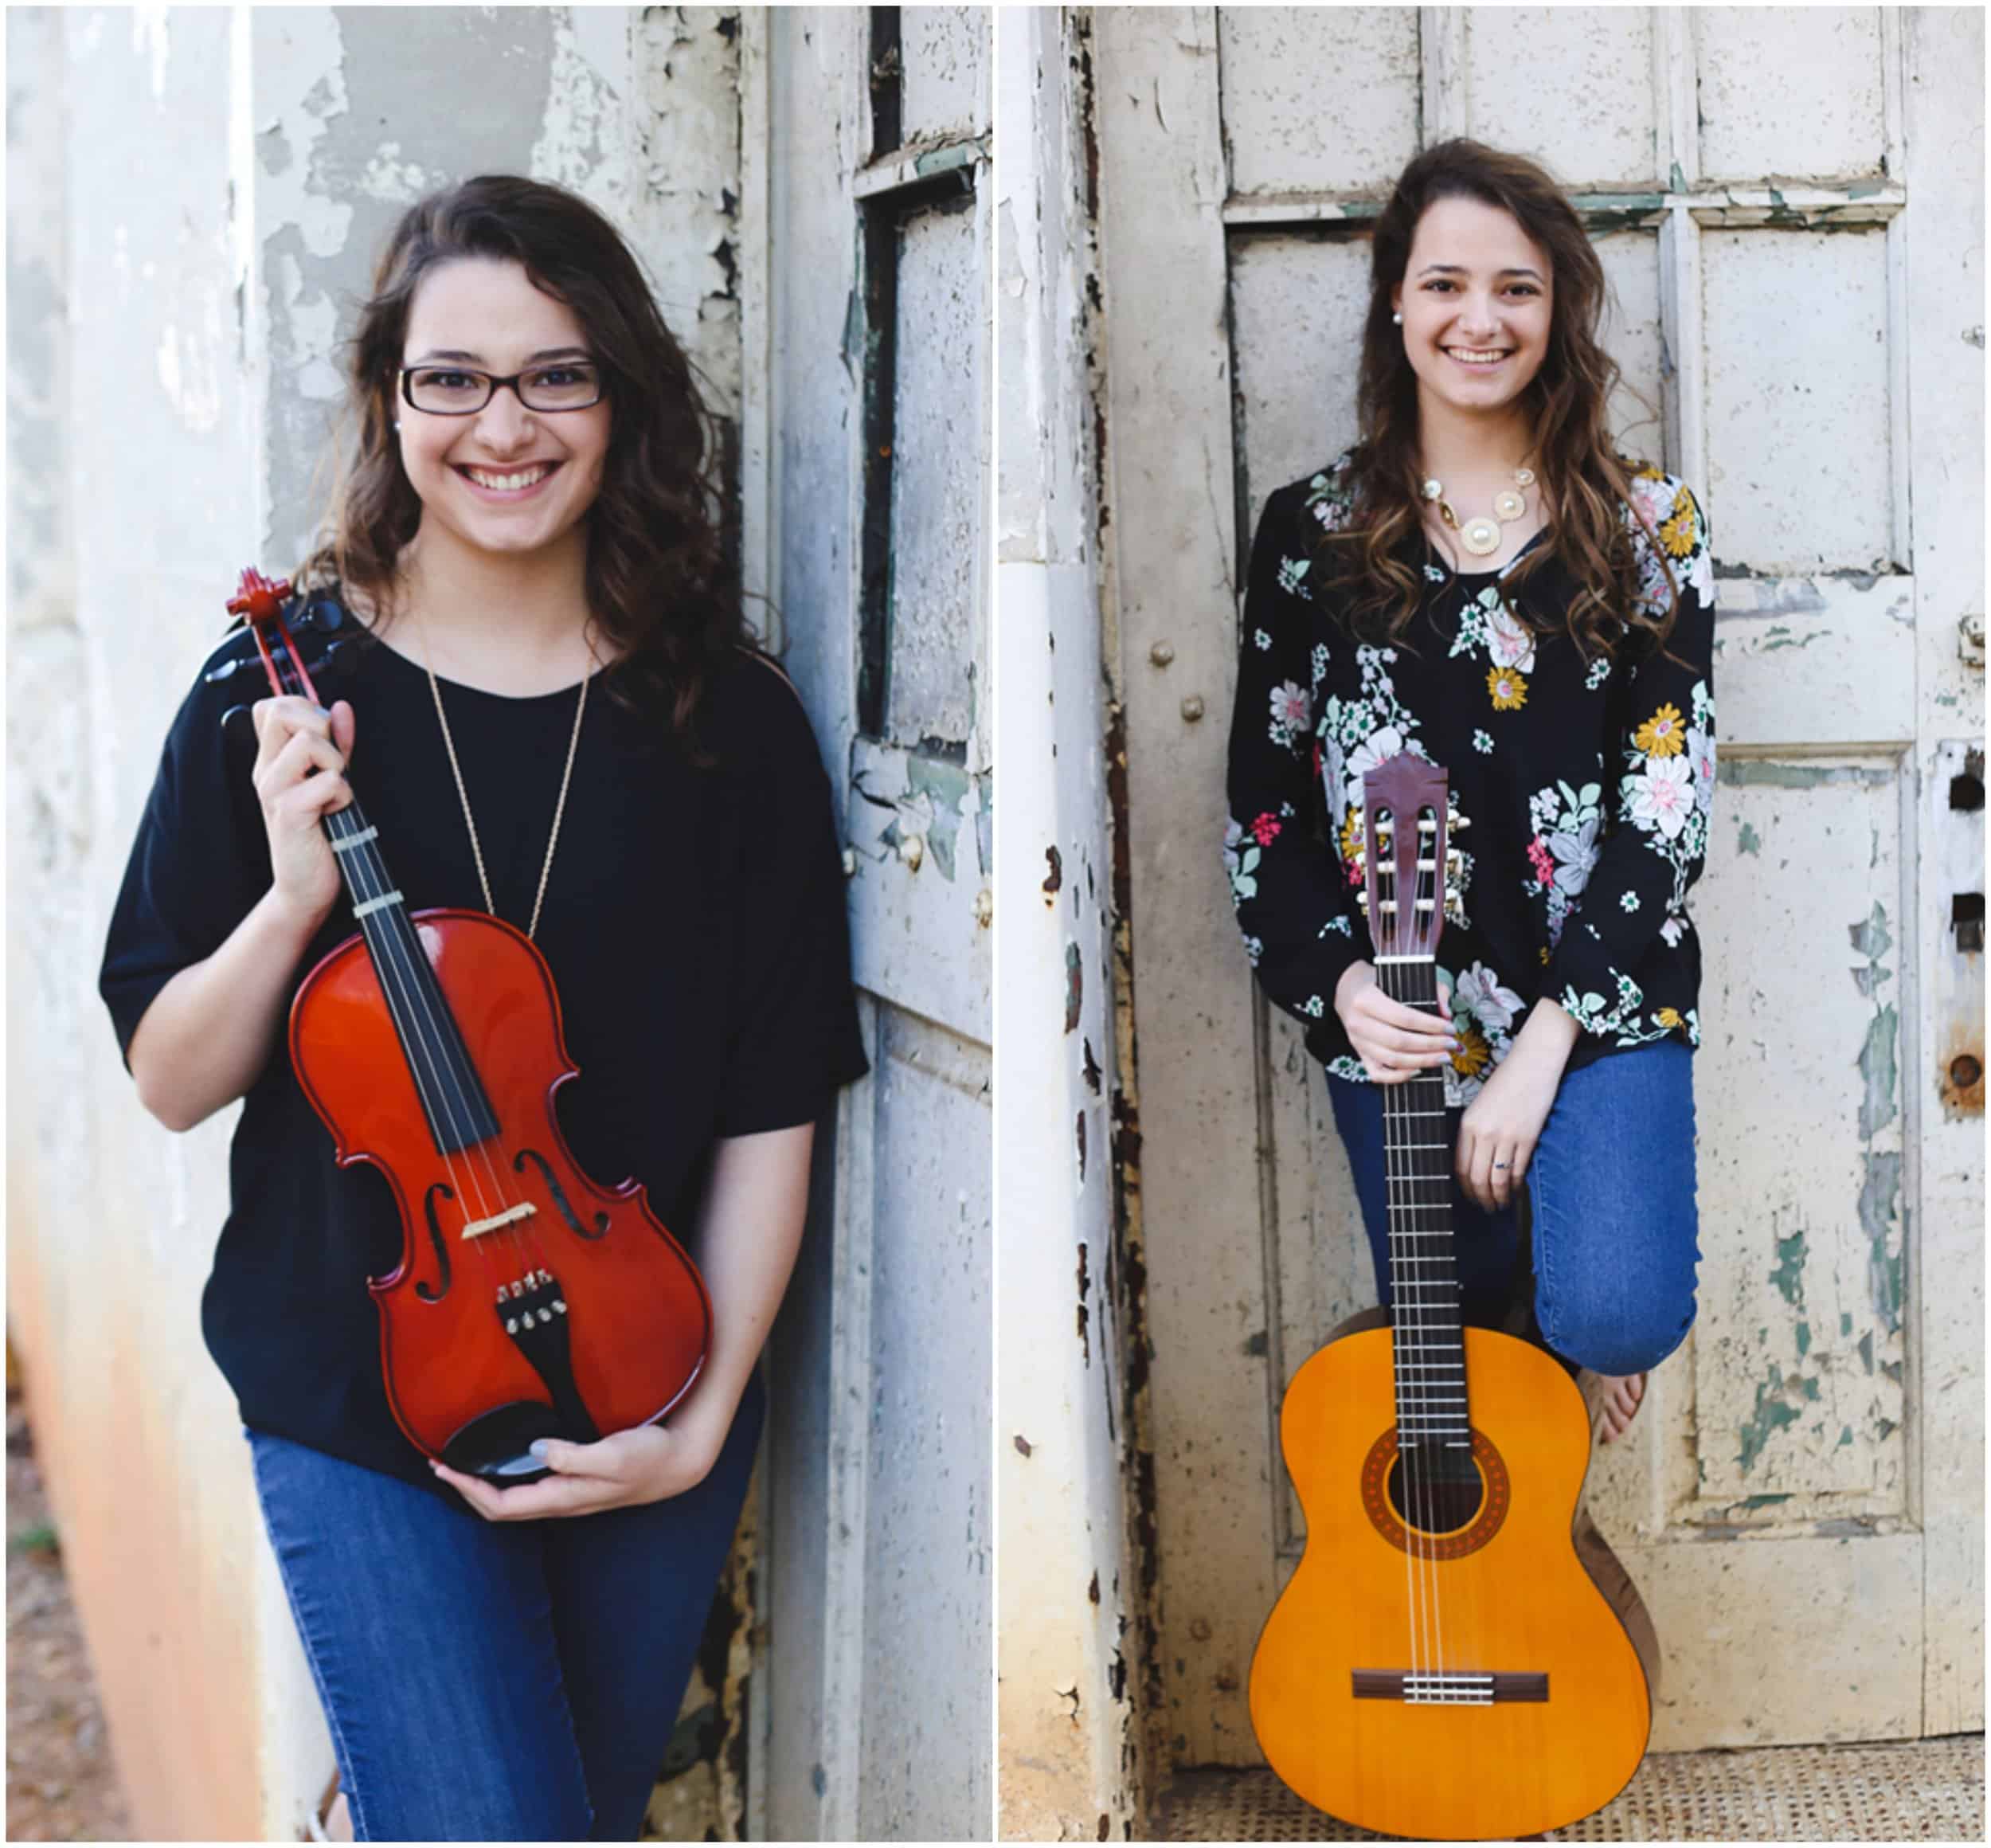 Left: Rachel with her violin; Right: Nicole with her guitar